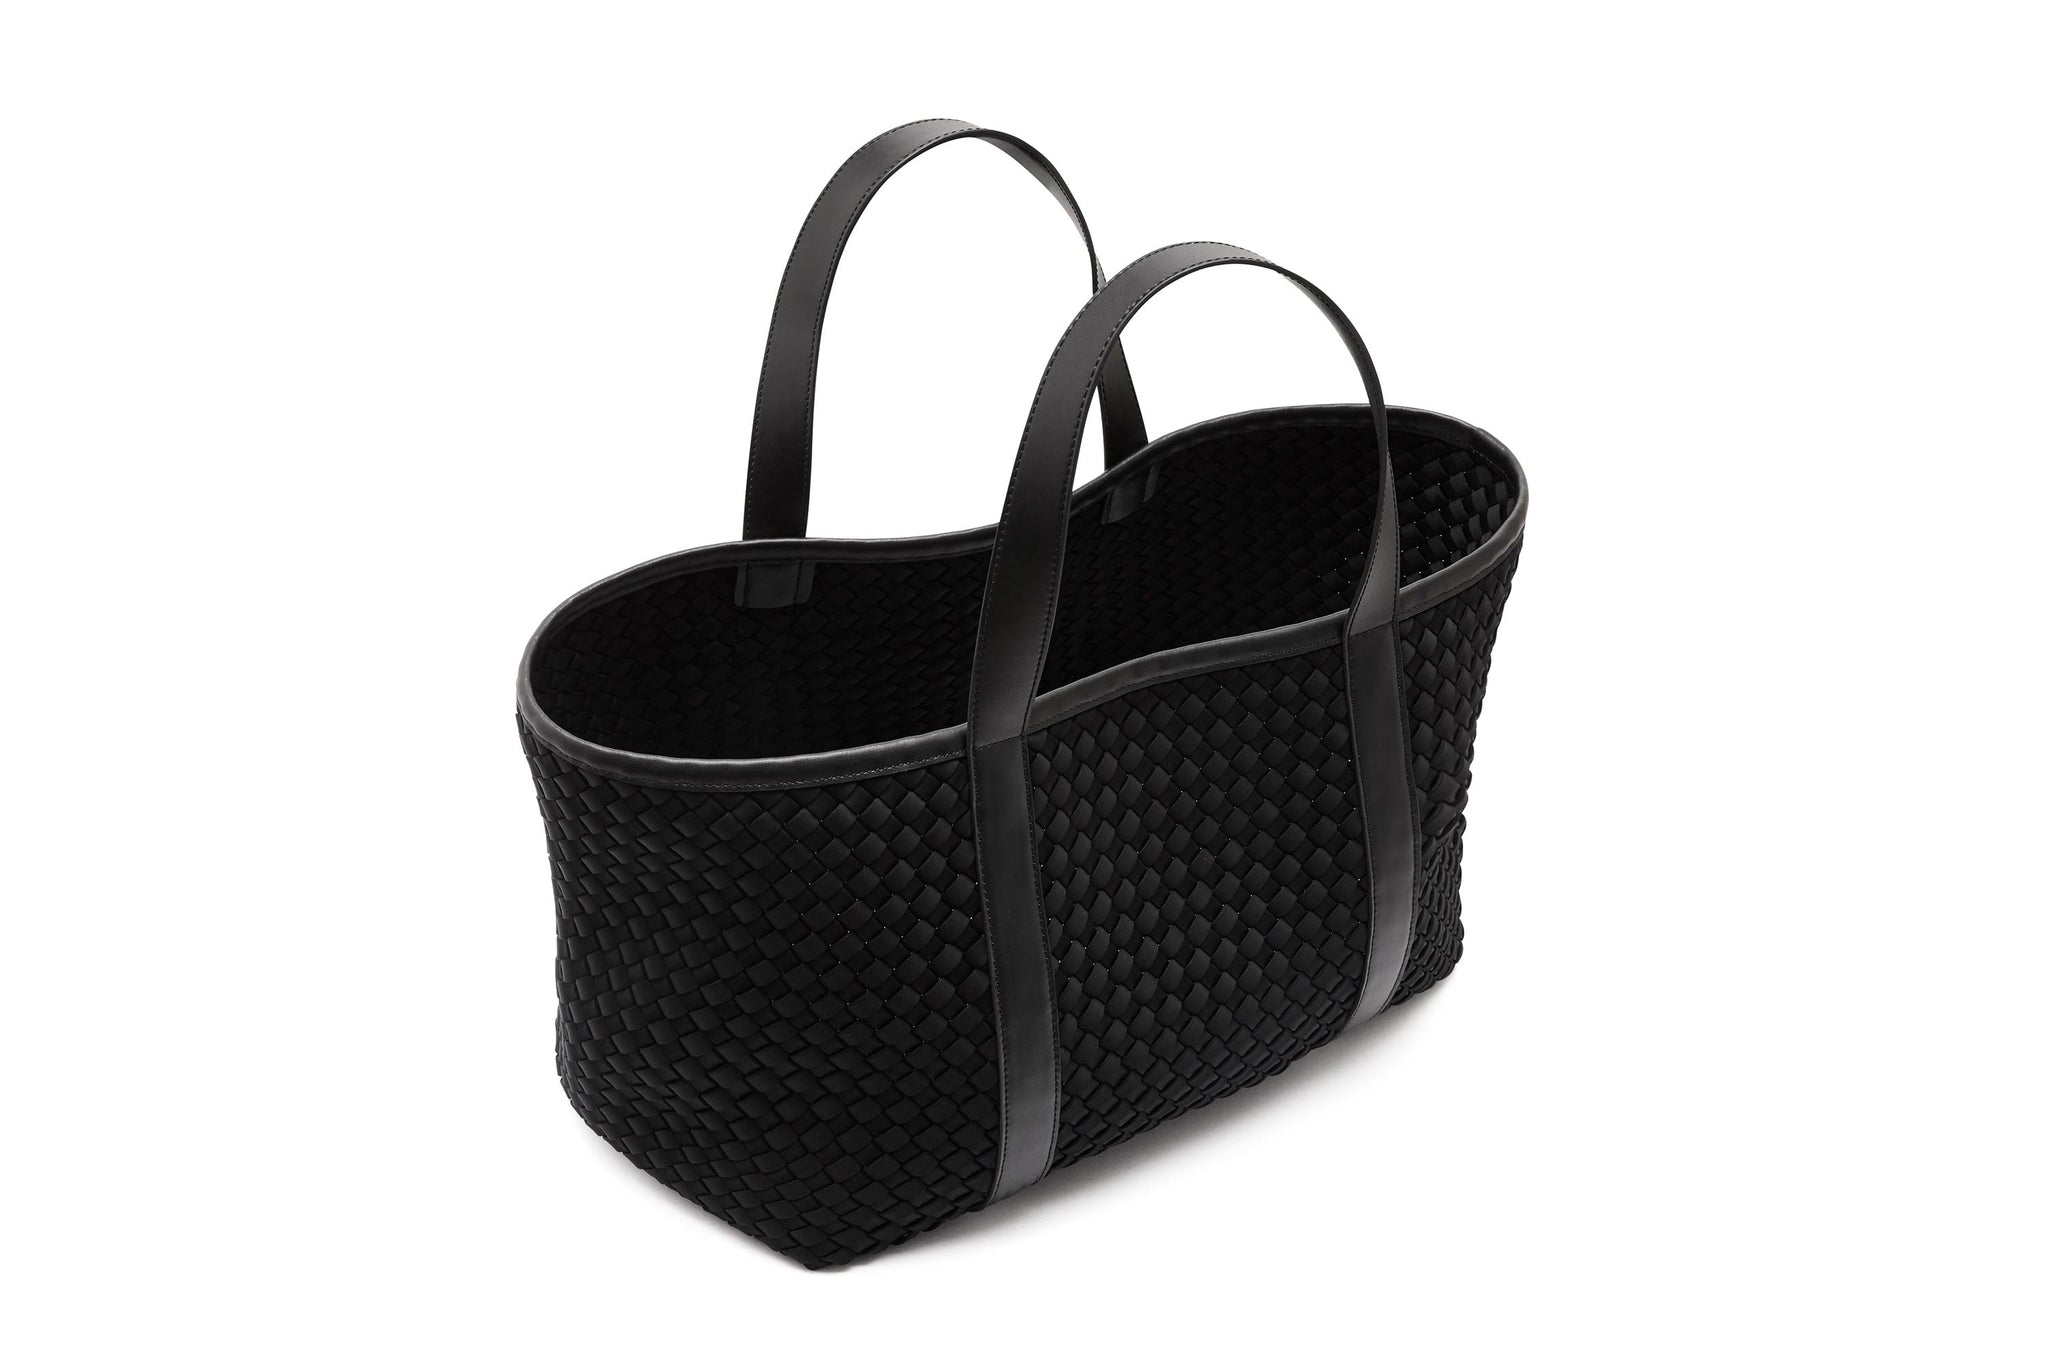 18.56 Rylan Uni-sex Black Woven Neoprene with Leather Carry-All Tote